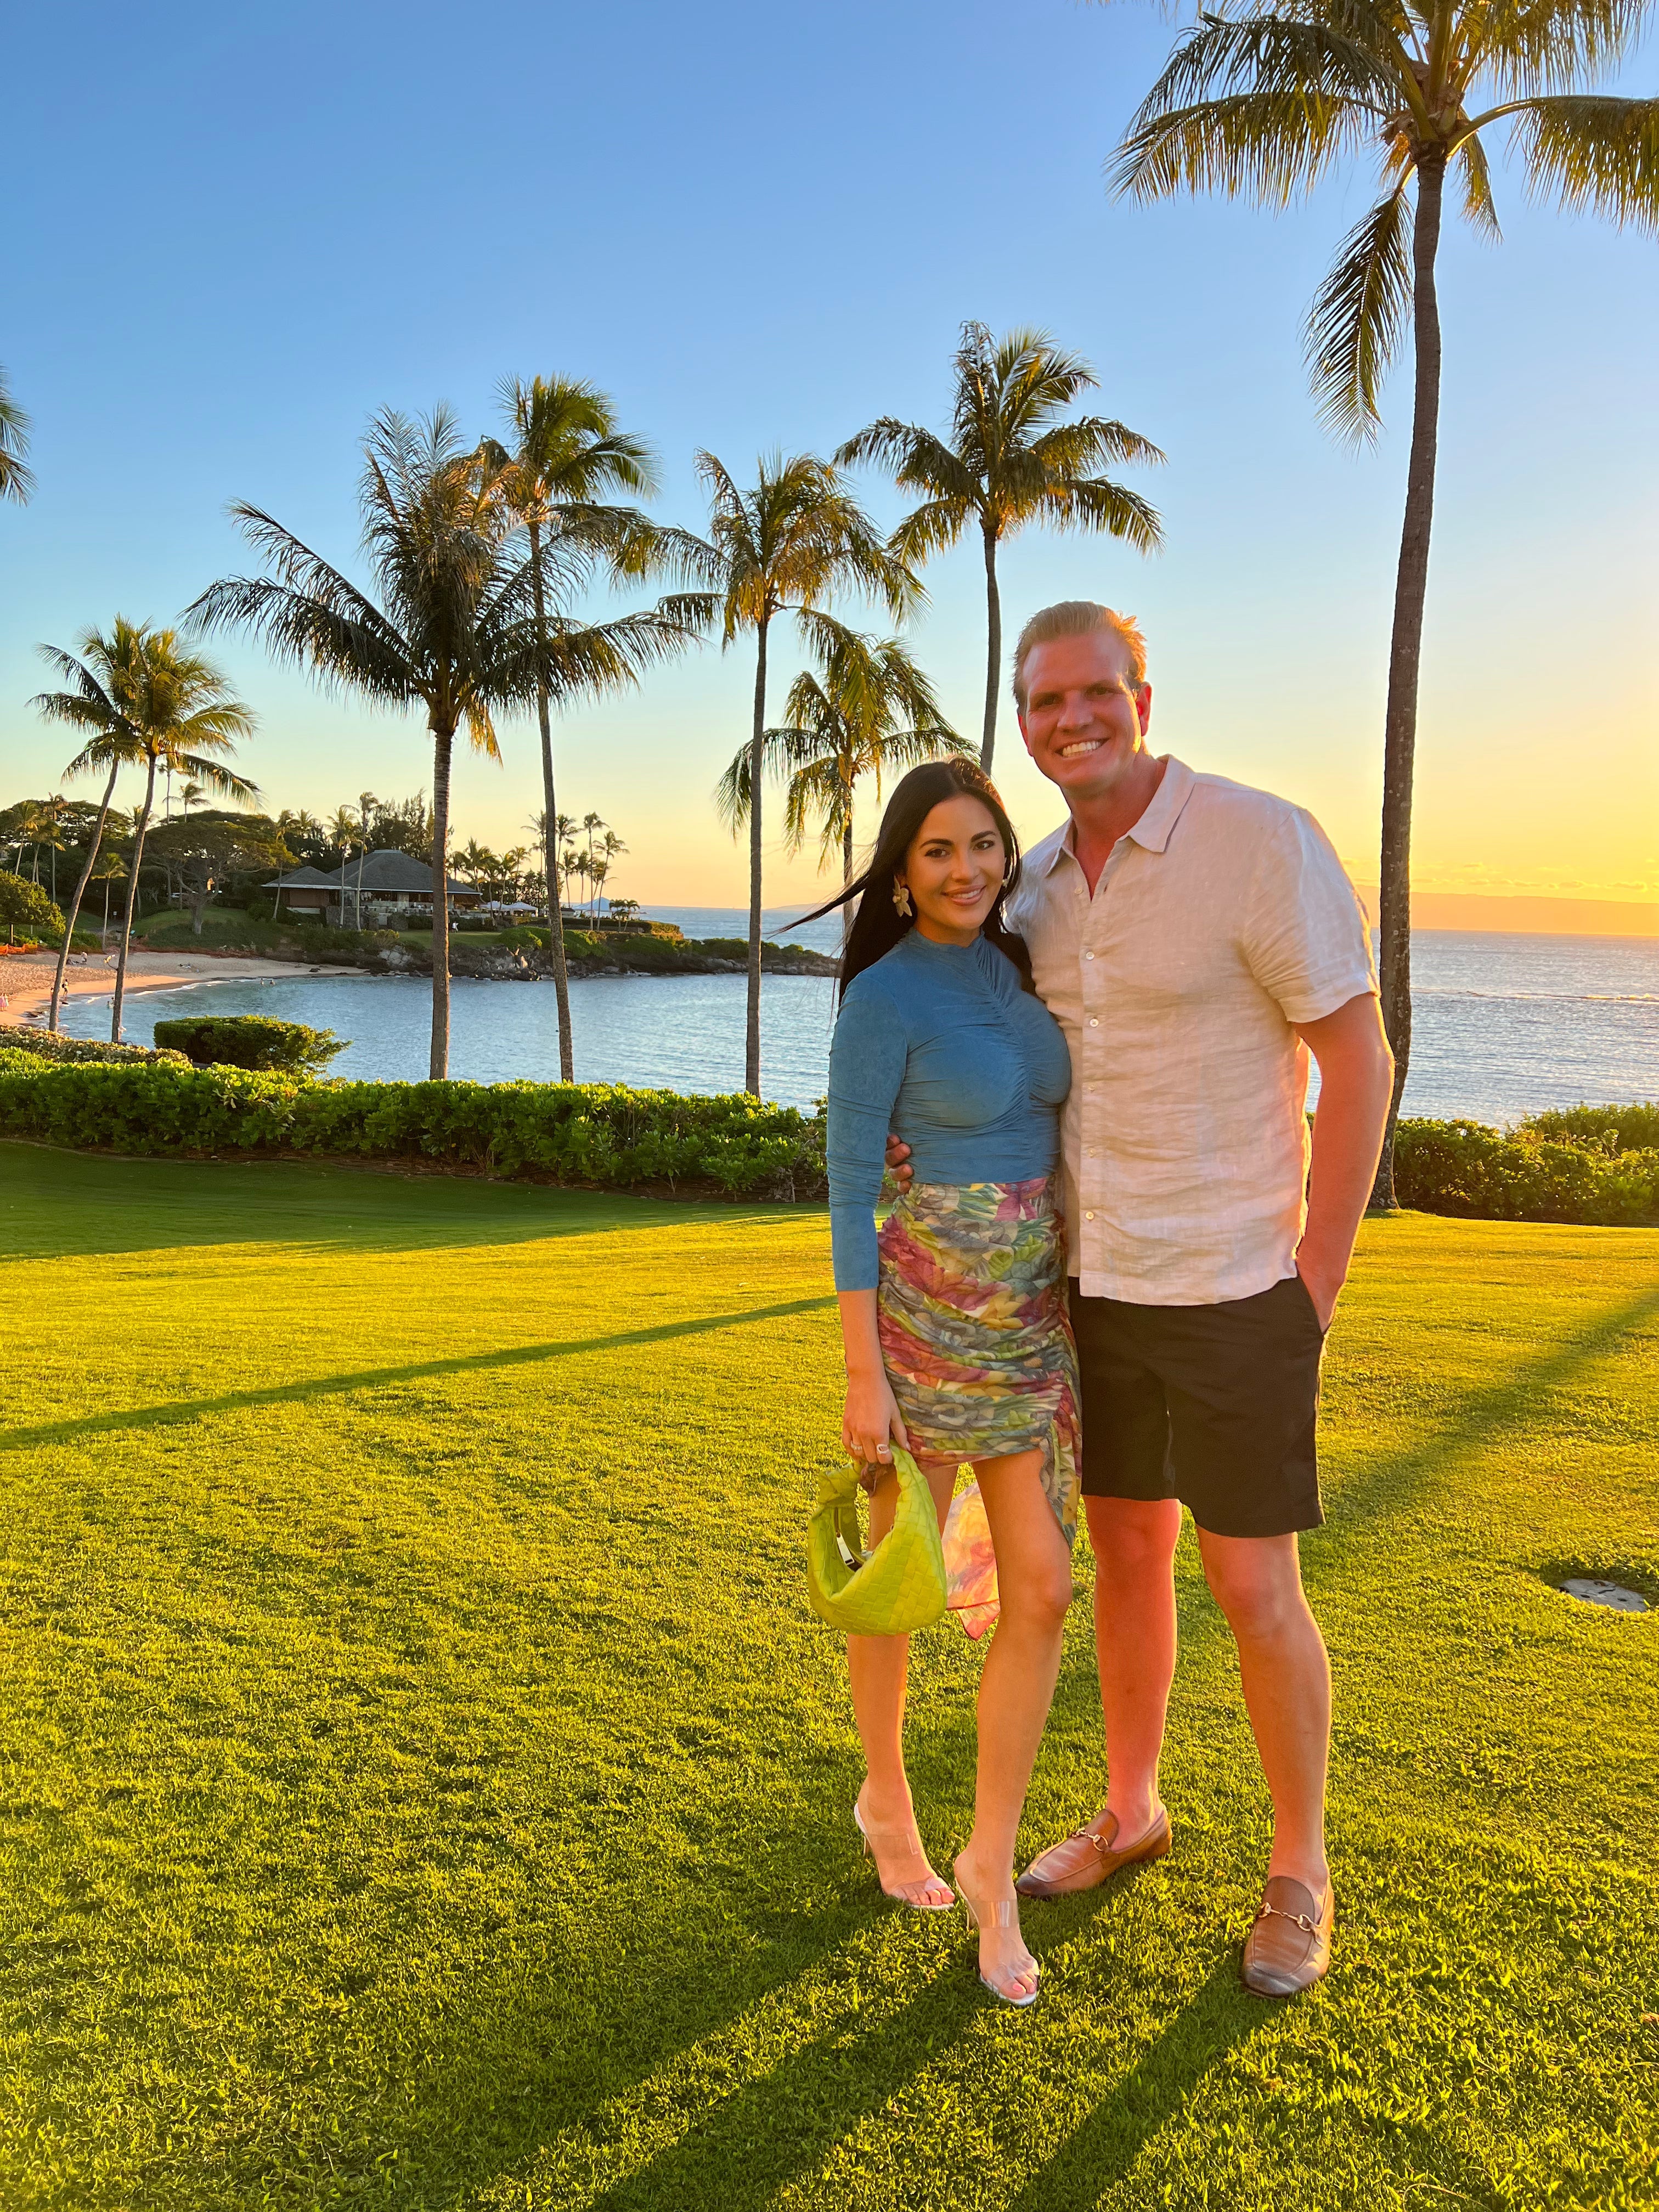 Our Maui Vacation